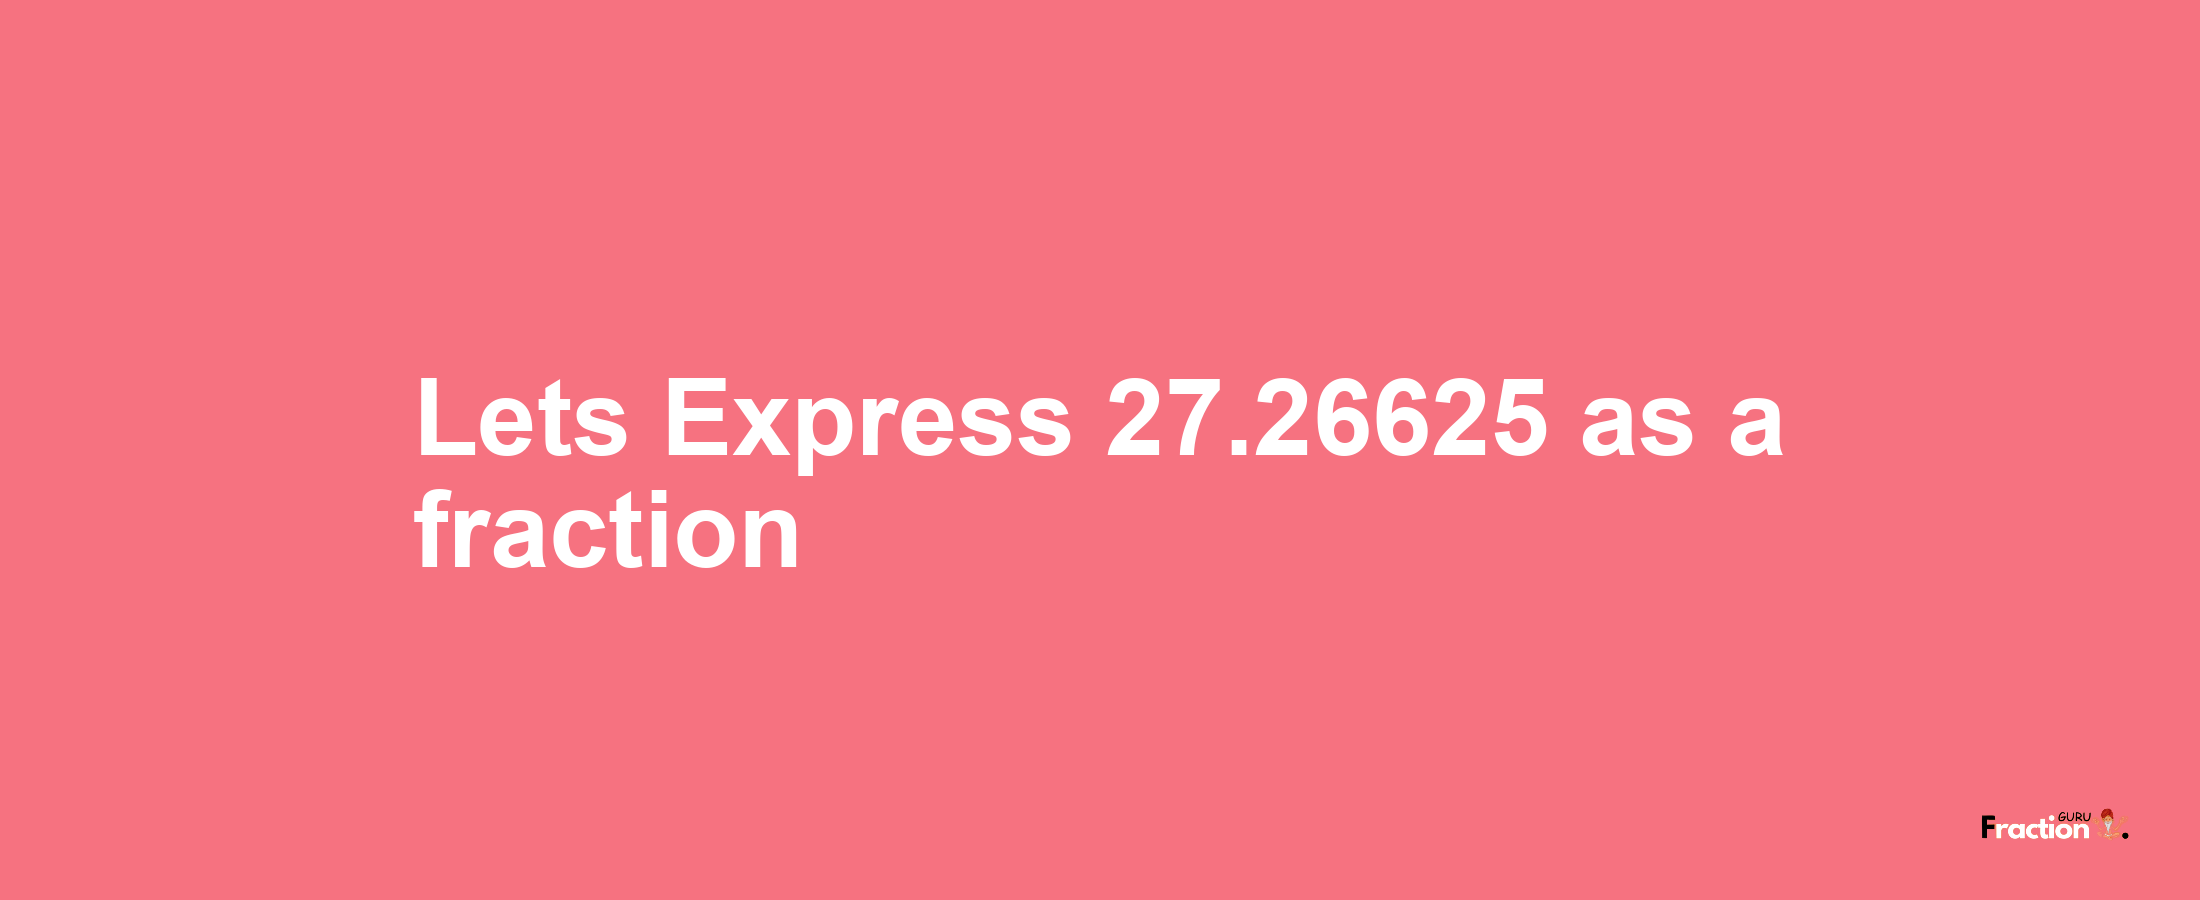 Lets Express 27.26625 as afraction